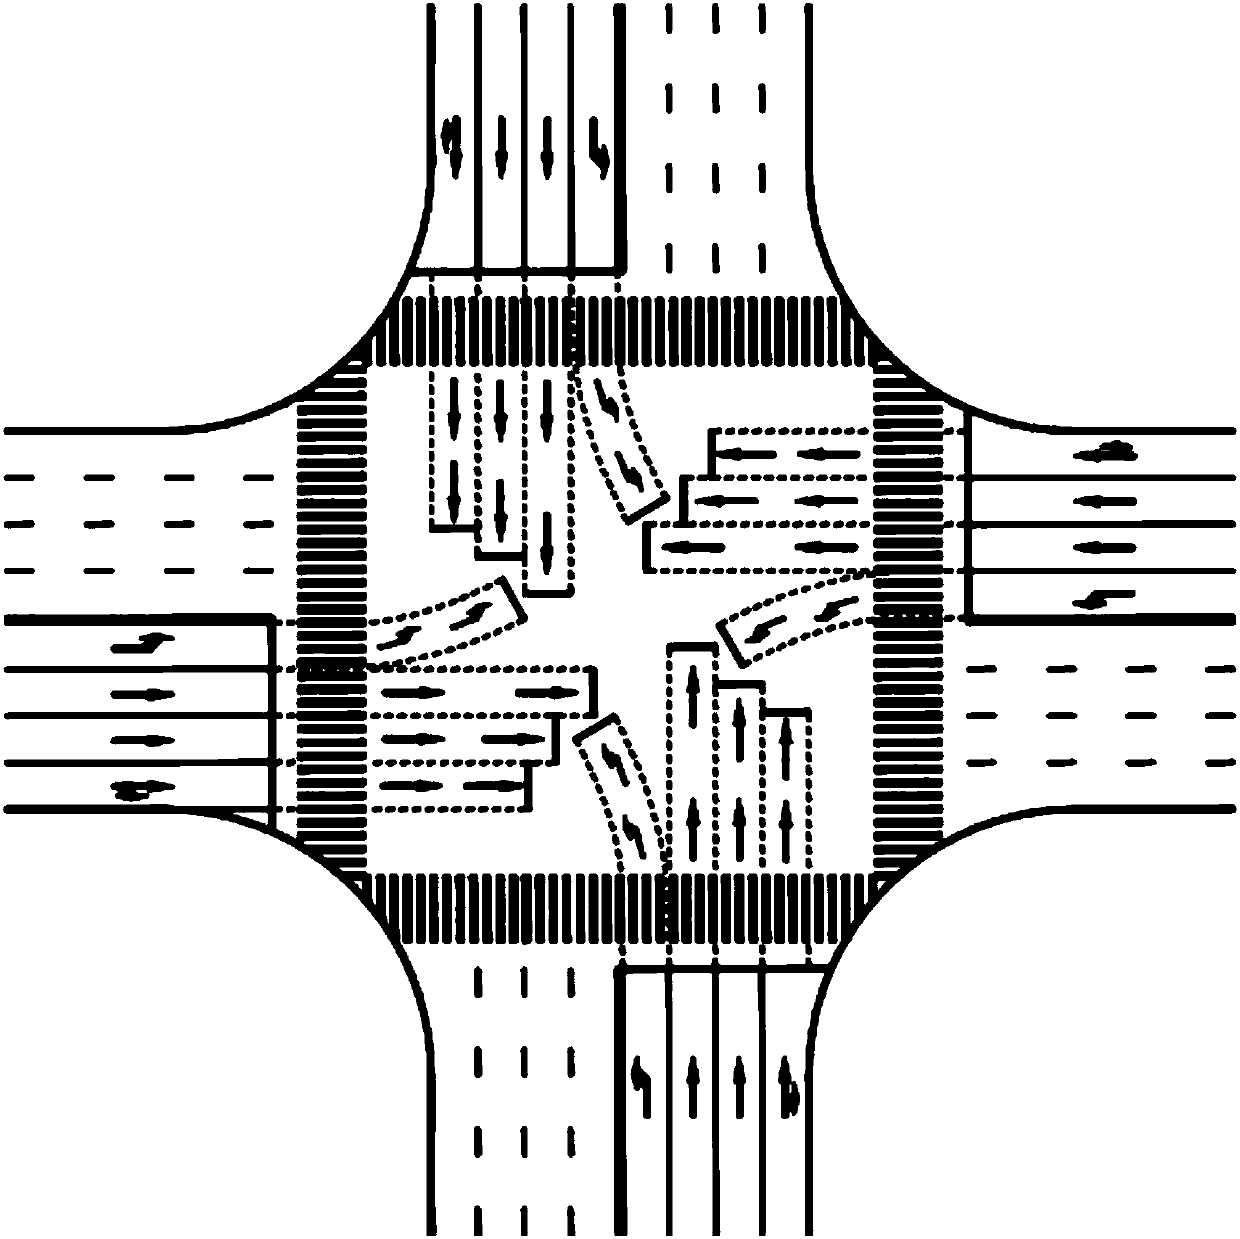 Traffic signal control method based on random fluctuation of traffic flow at adaptive intersection